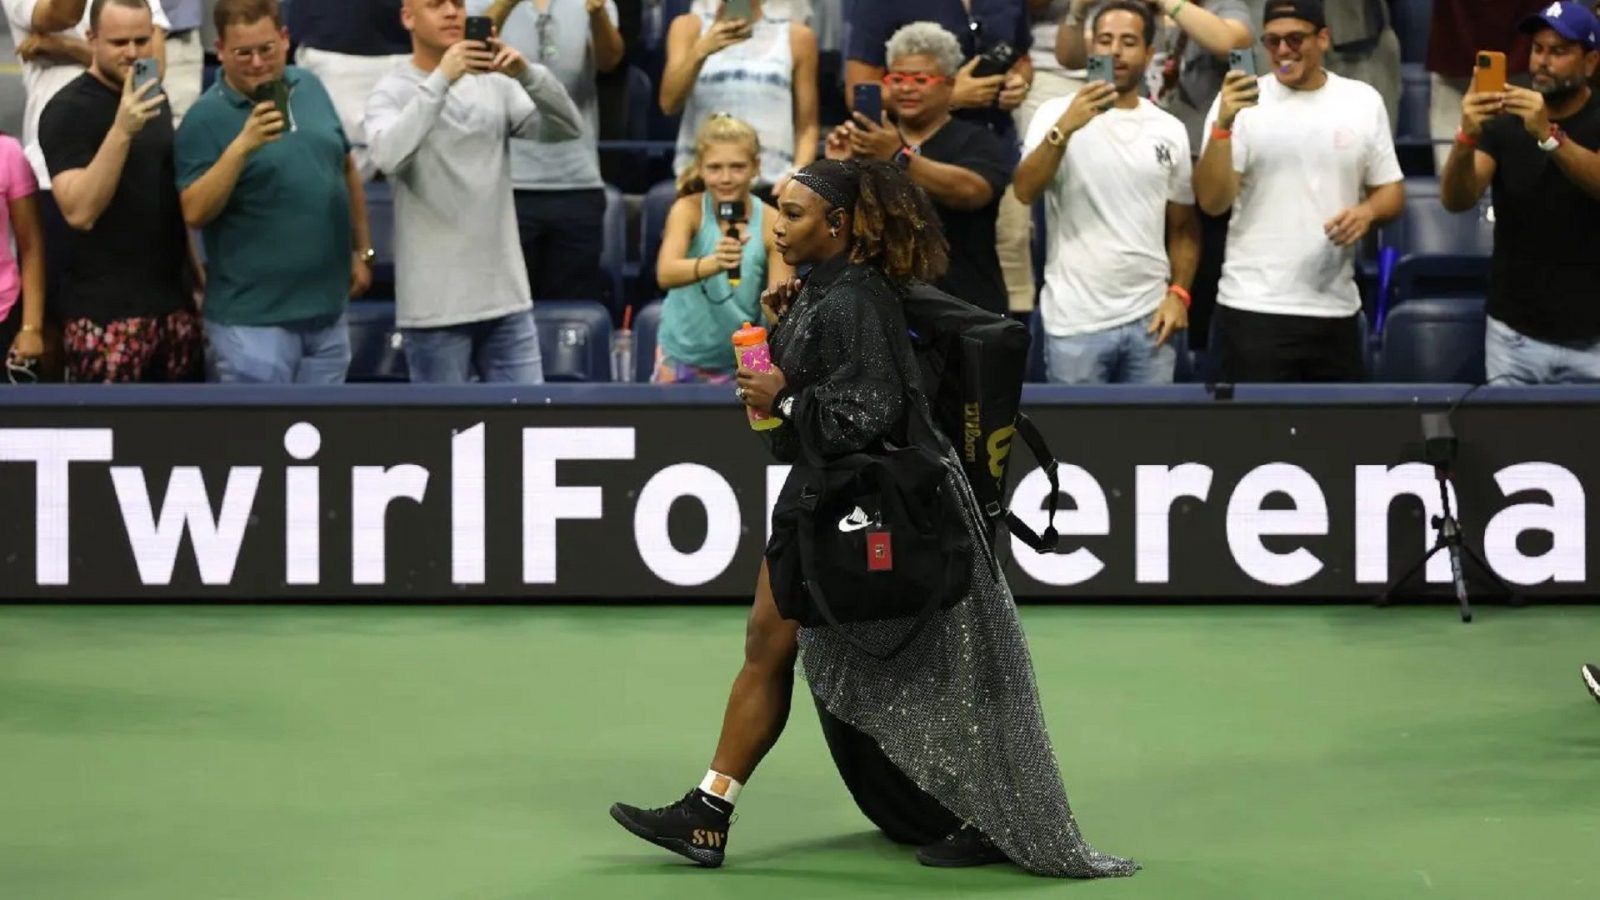 Serena Williams wears diamondencrusted Nike outfit at US Open 2022